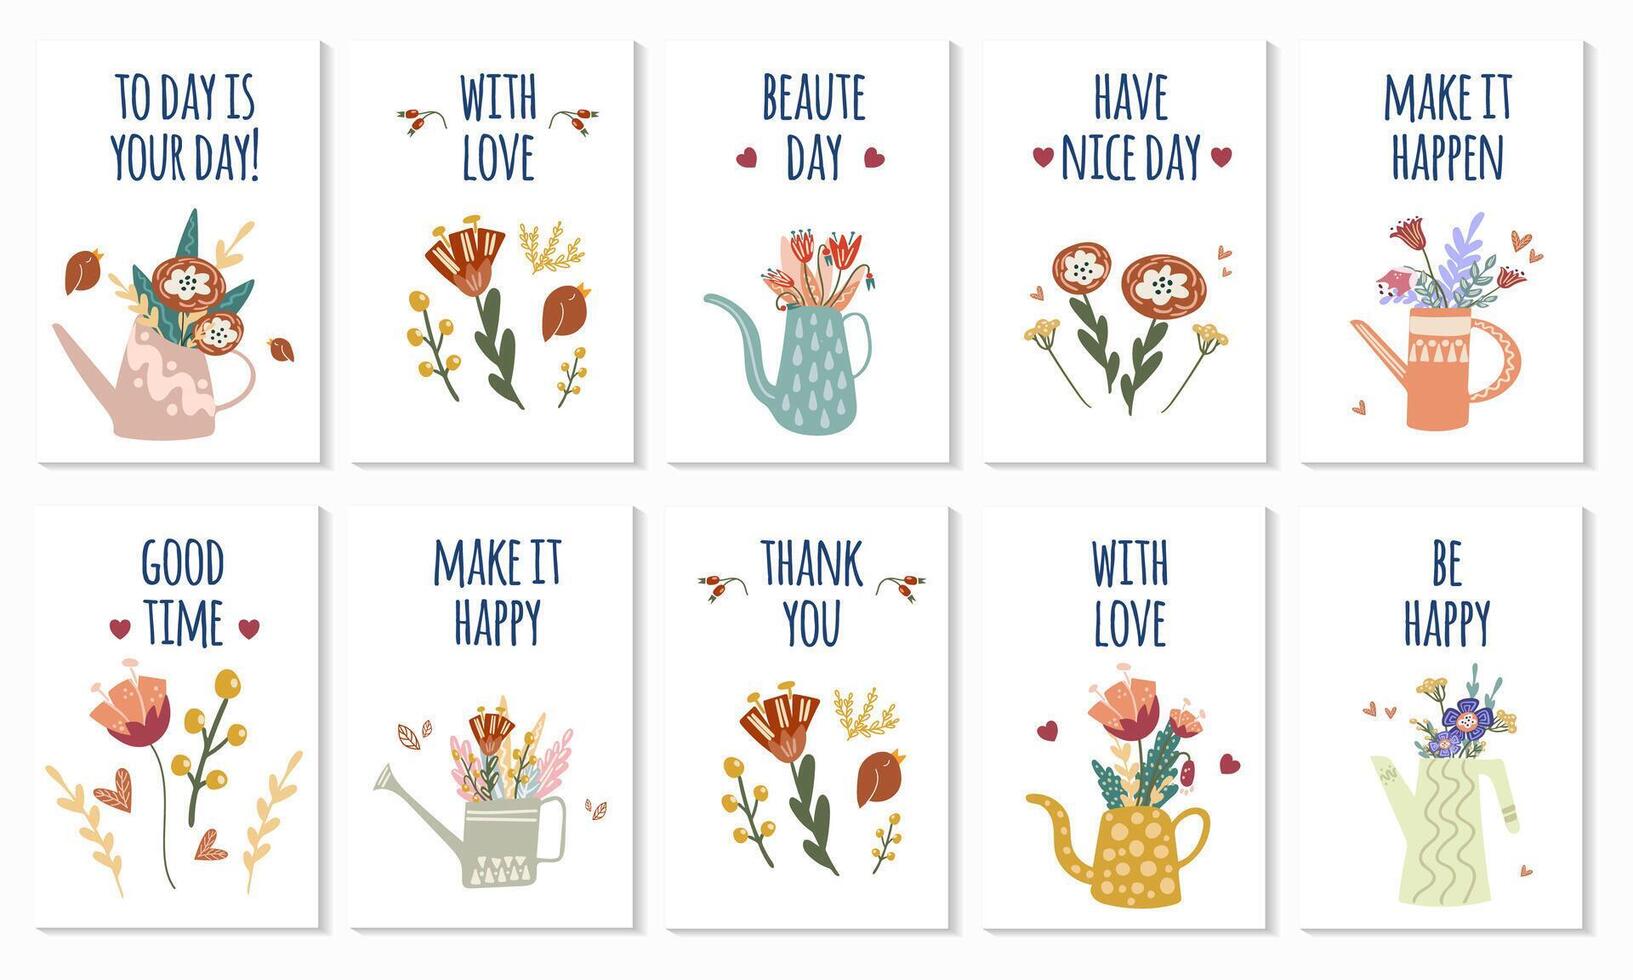 A set of postcards with quotes and flowers in watering cans. Suitable for greeting cards, posters, covers, invitations. Vector illustration in cartoon style.